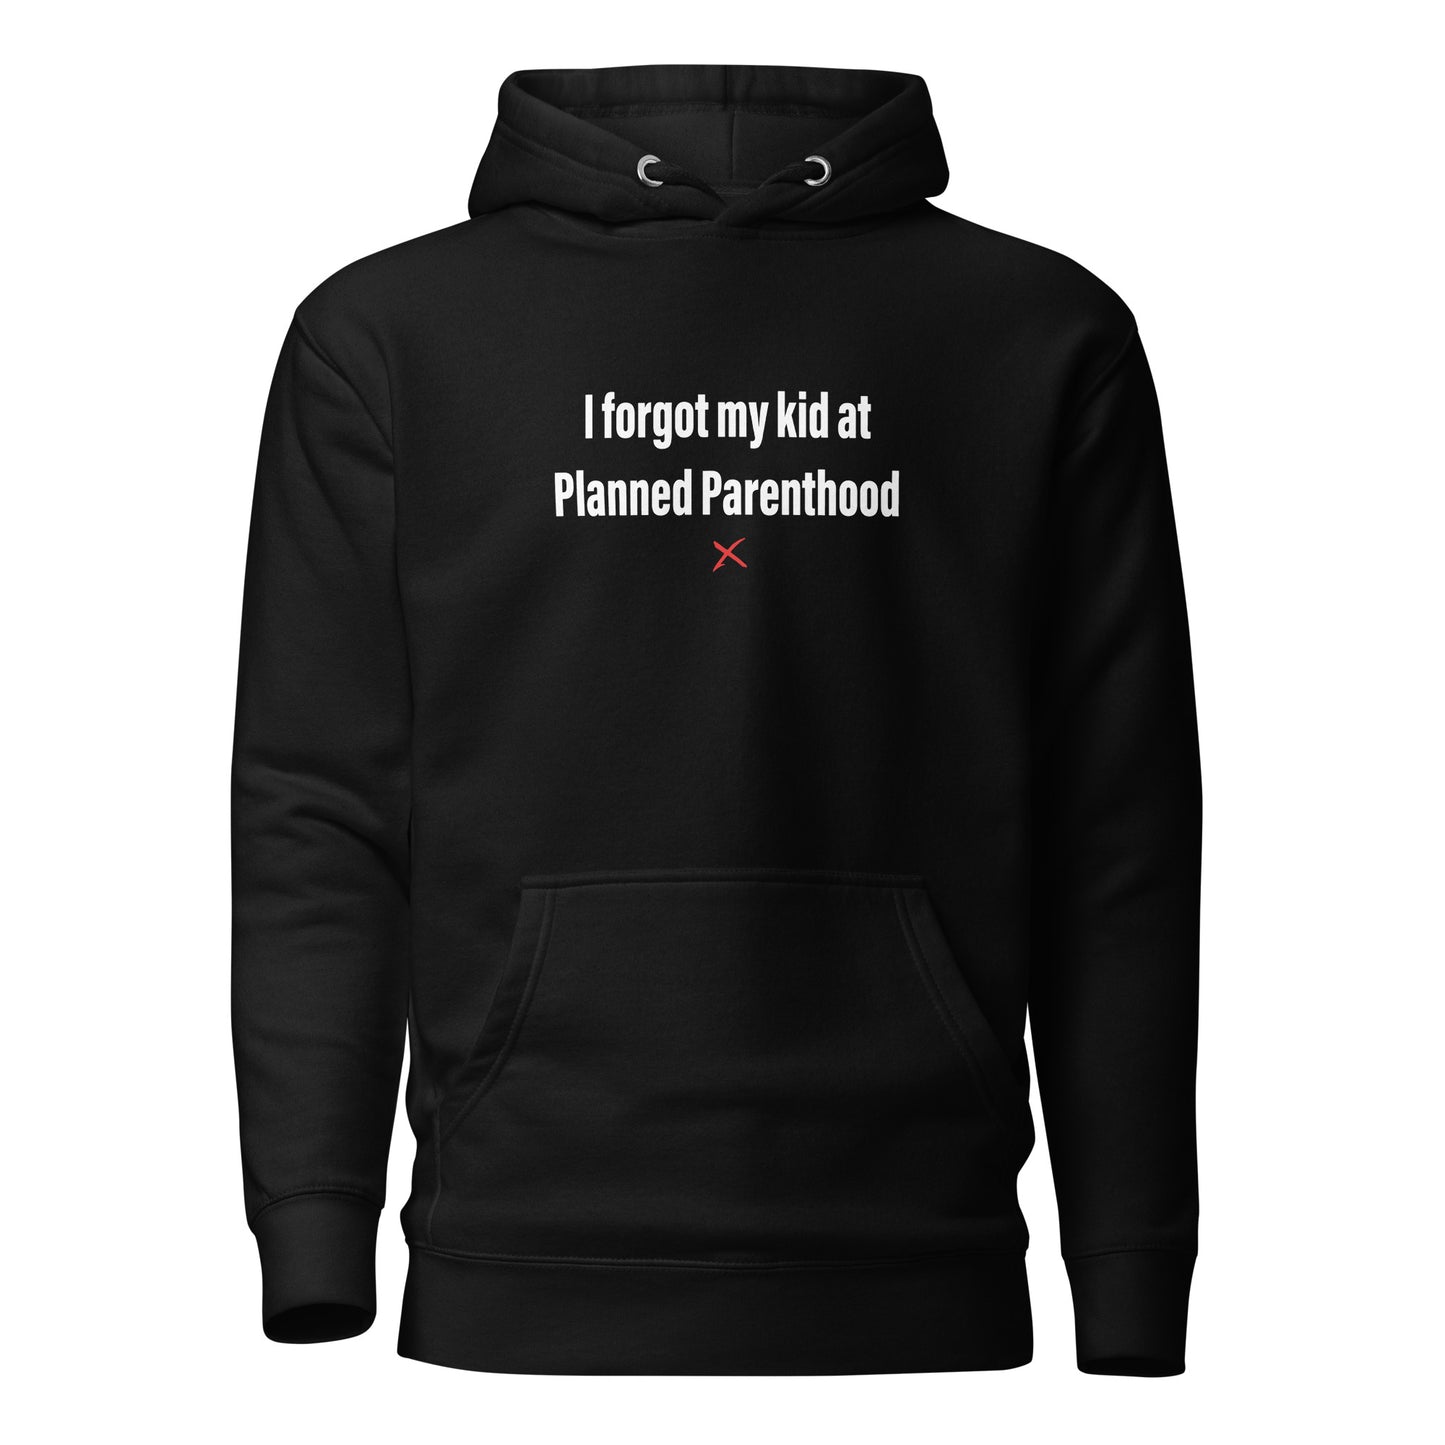 I forgot my kid at Planned Parenthood - Hoodie